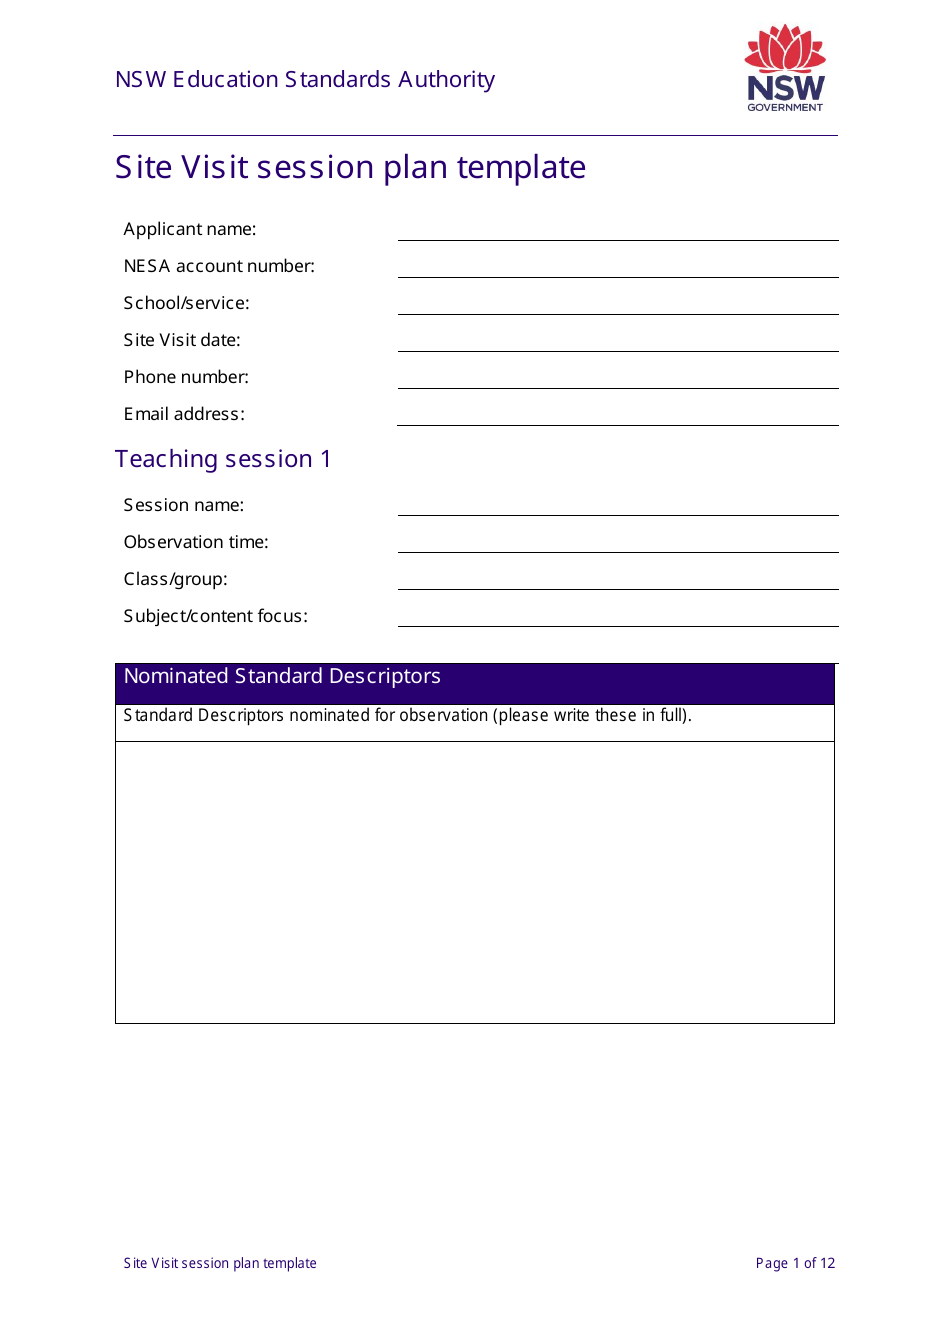 Site Visit Session Plan Template - New South Wales, Australia, Page 1